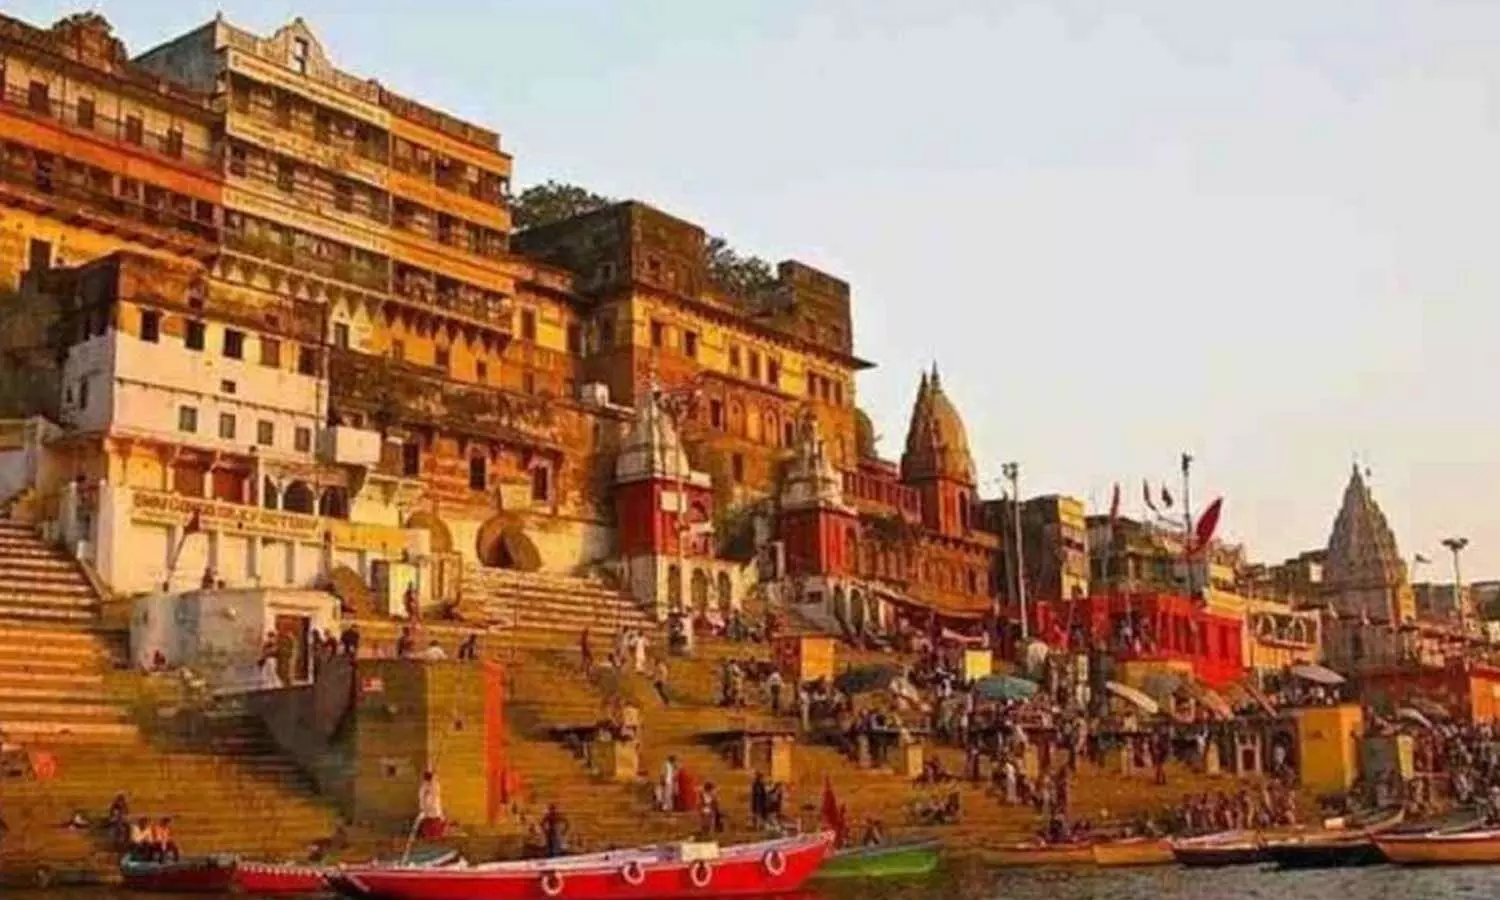 Kashi city is the main attraction for domestic and foreign tourists